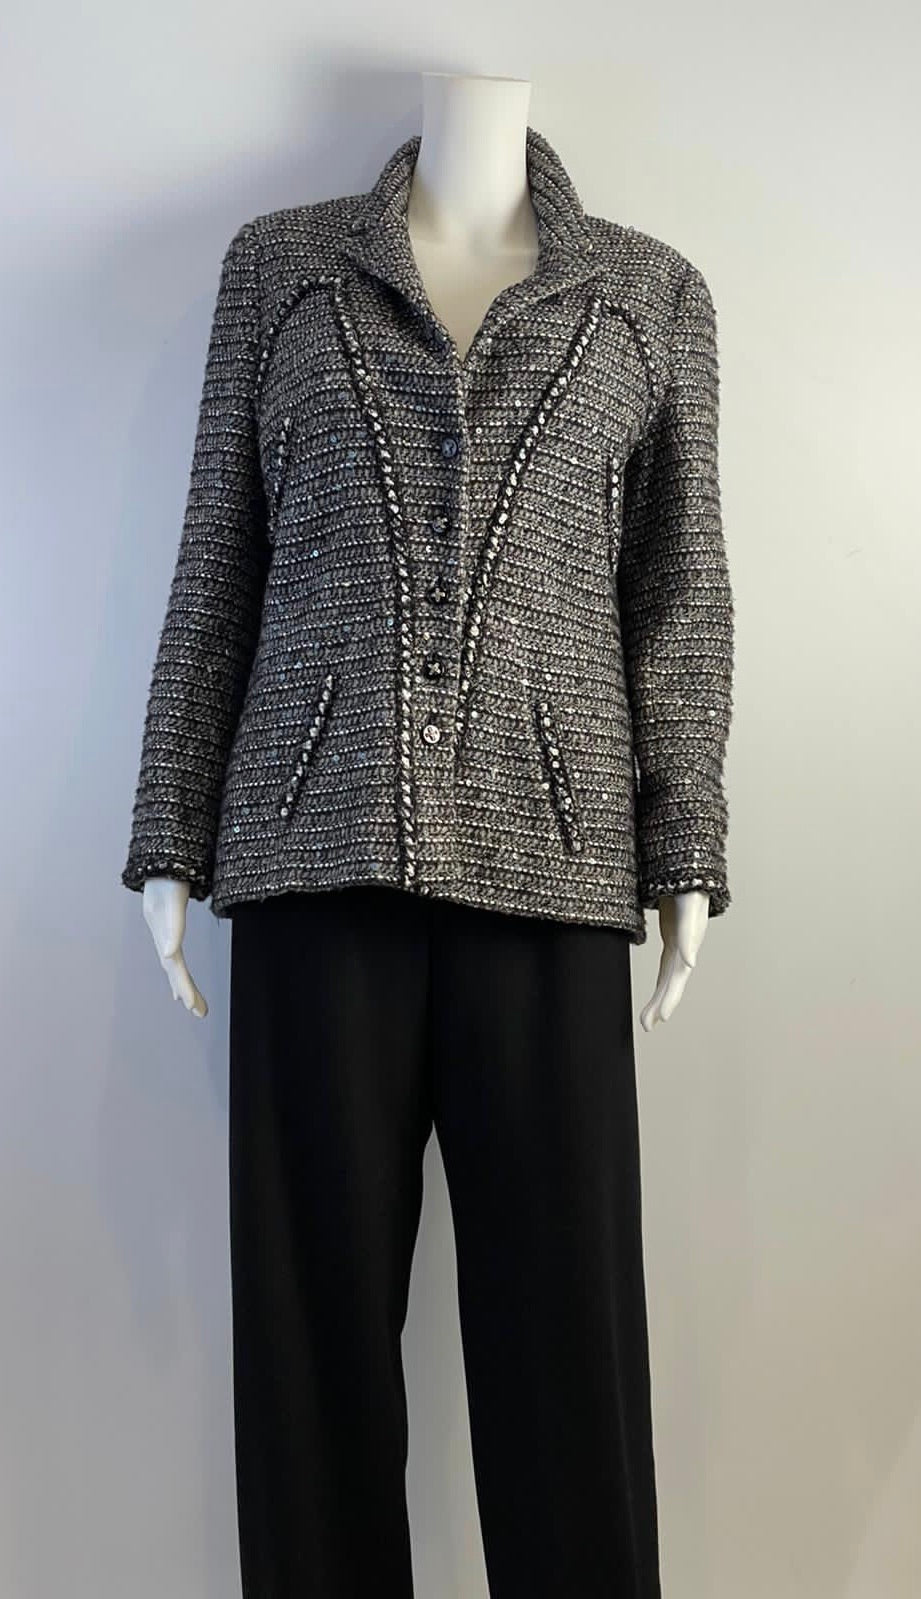 Chanel Black And White Tweed Suit With Spots